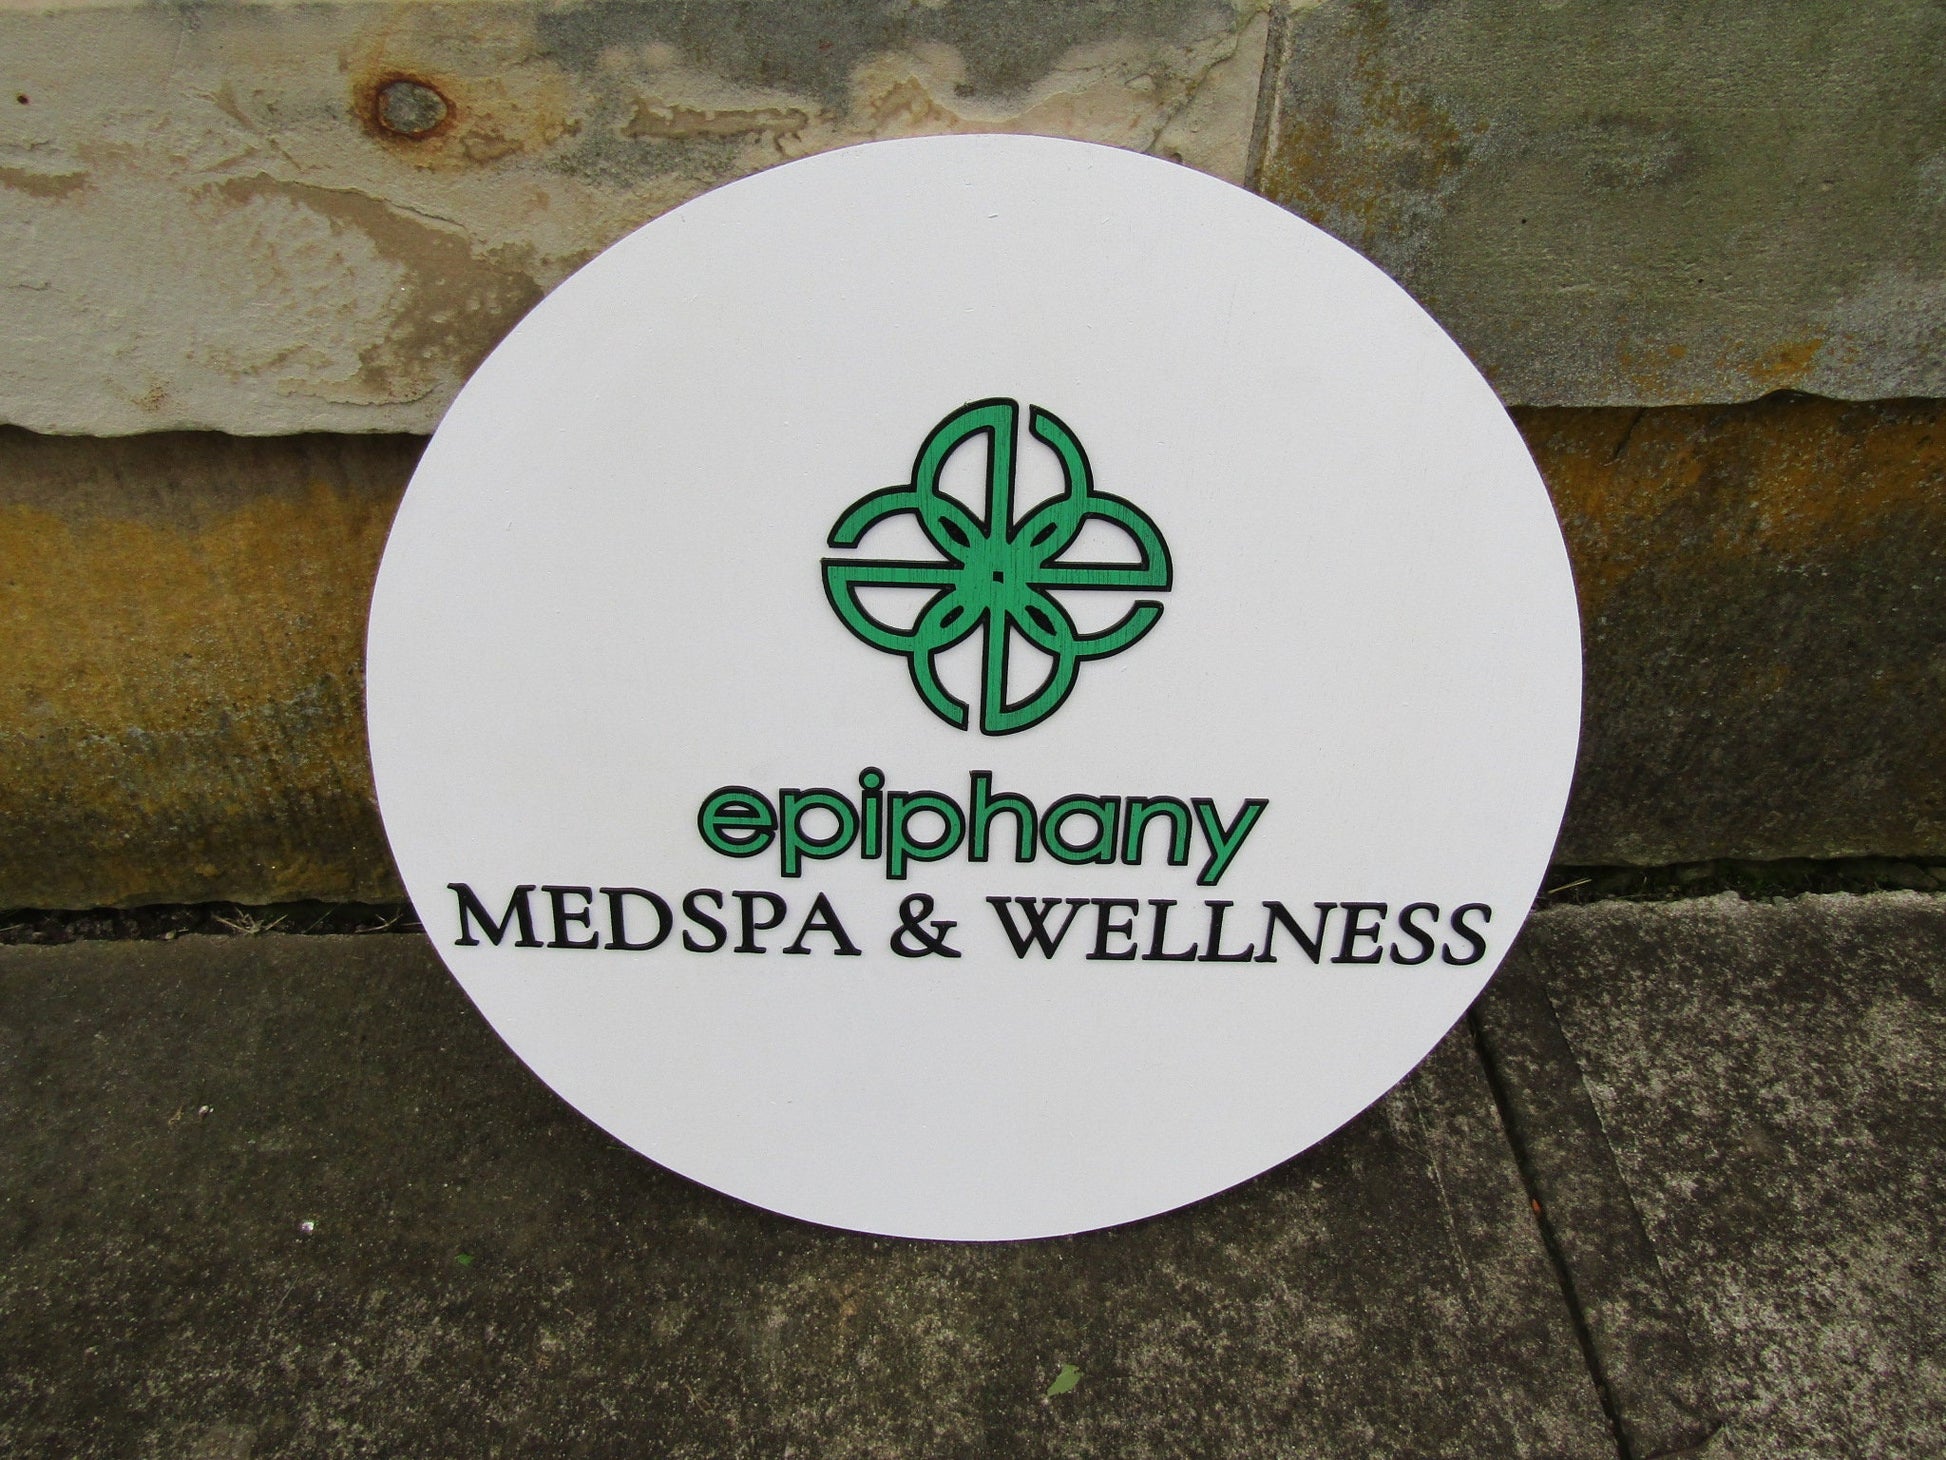 Epiphany Custom Round Business Commerical Signage MedSpa And Wellness Made to Order Store Front Small Shop Logo Circle Wooden Handmade